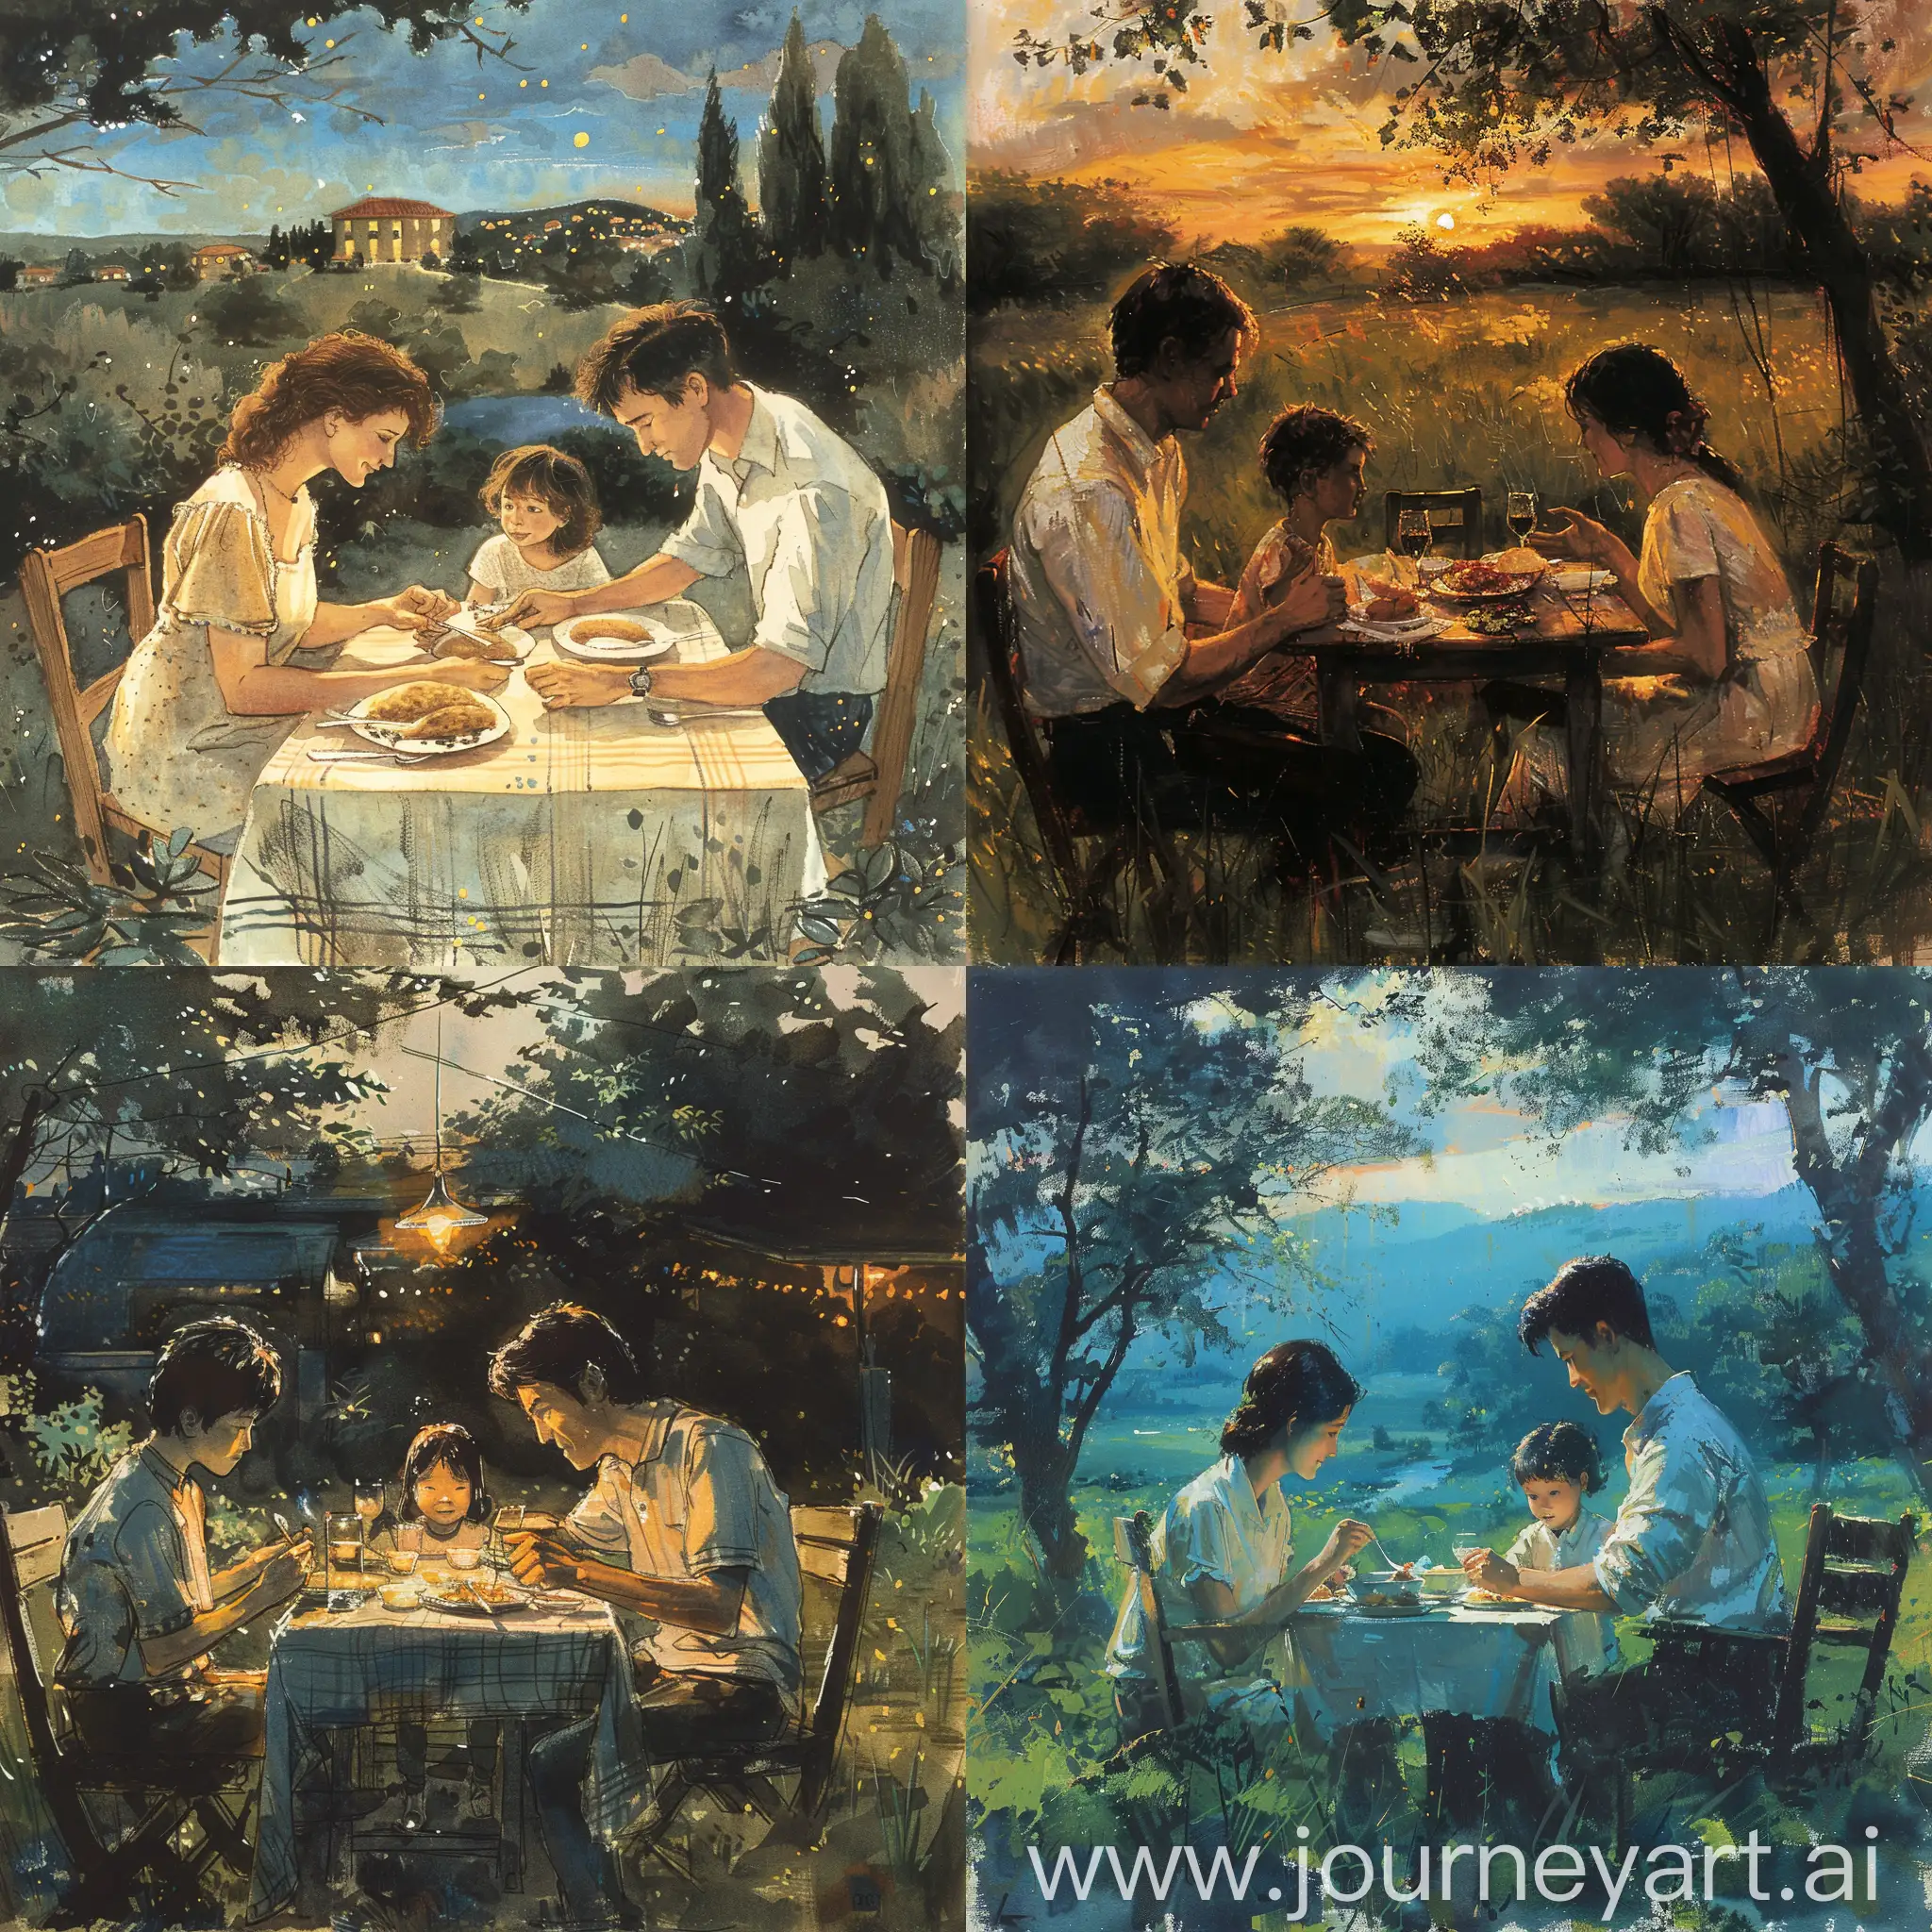 Family-Dining-in-1990s-Countryside